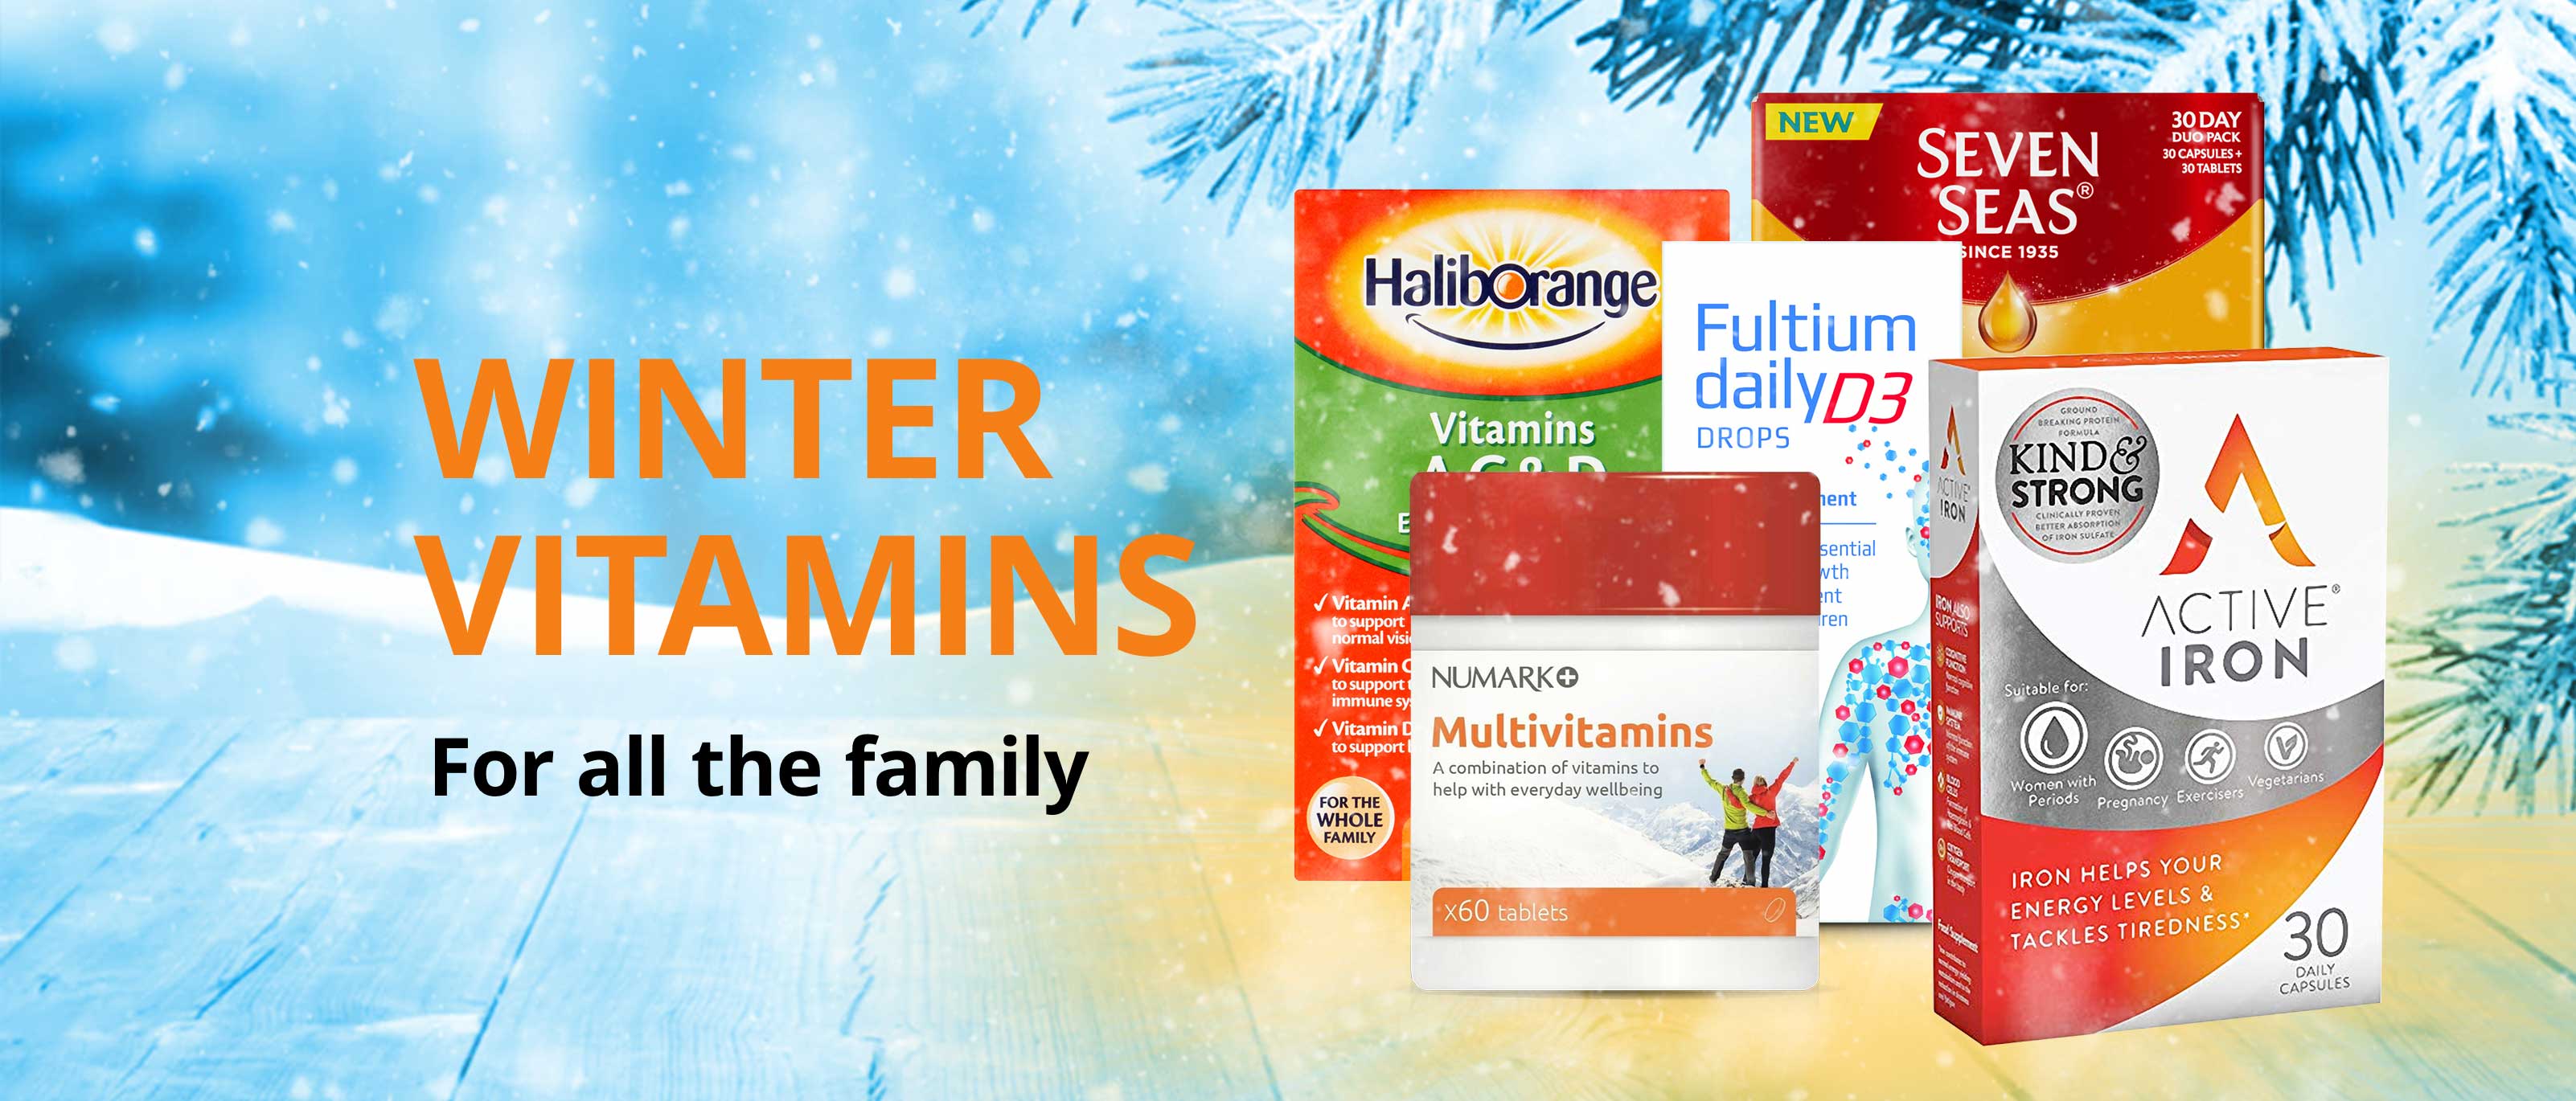 Winter vitamins for all the family